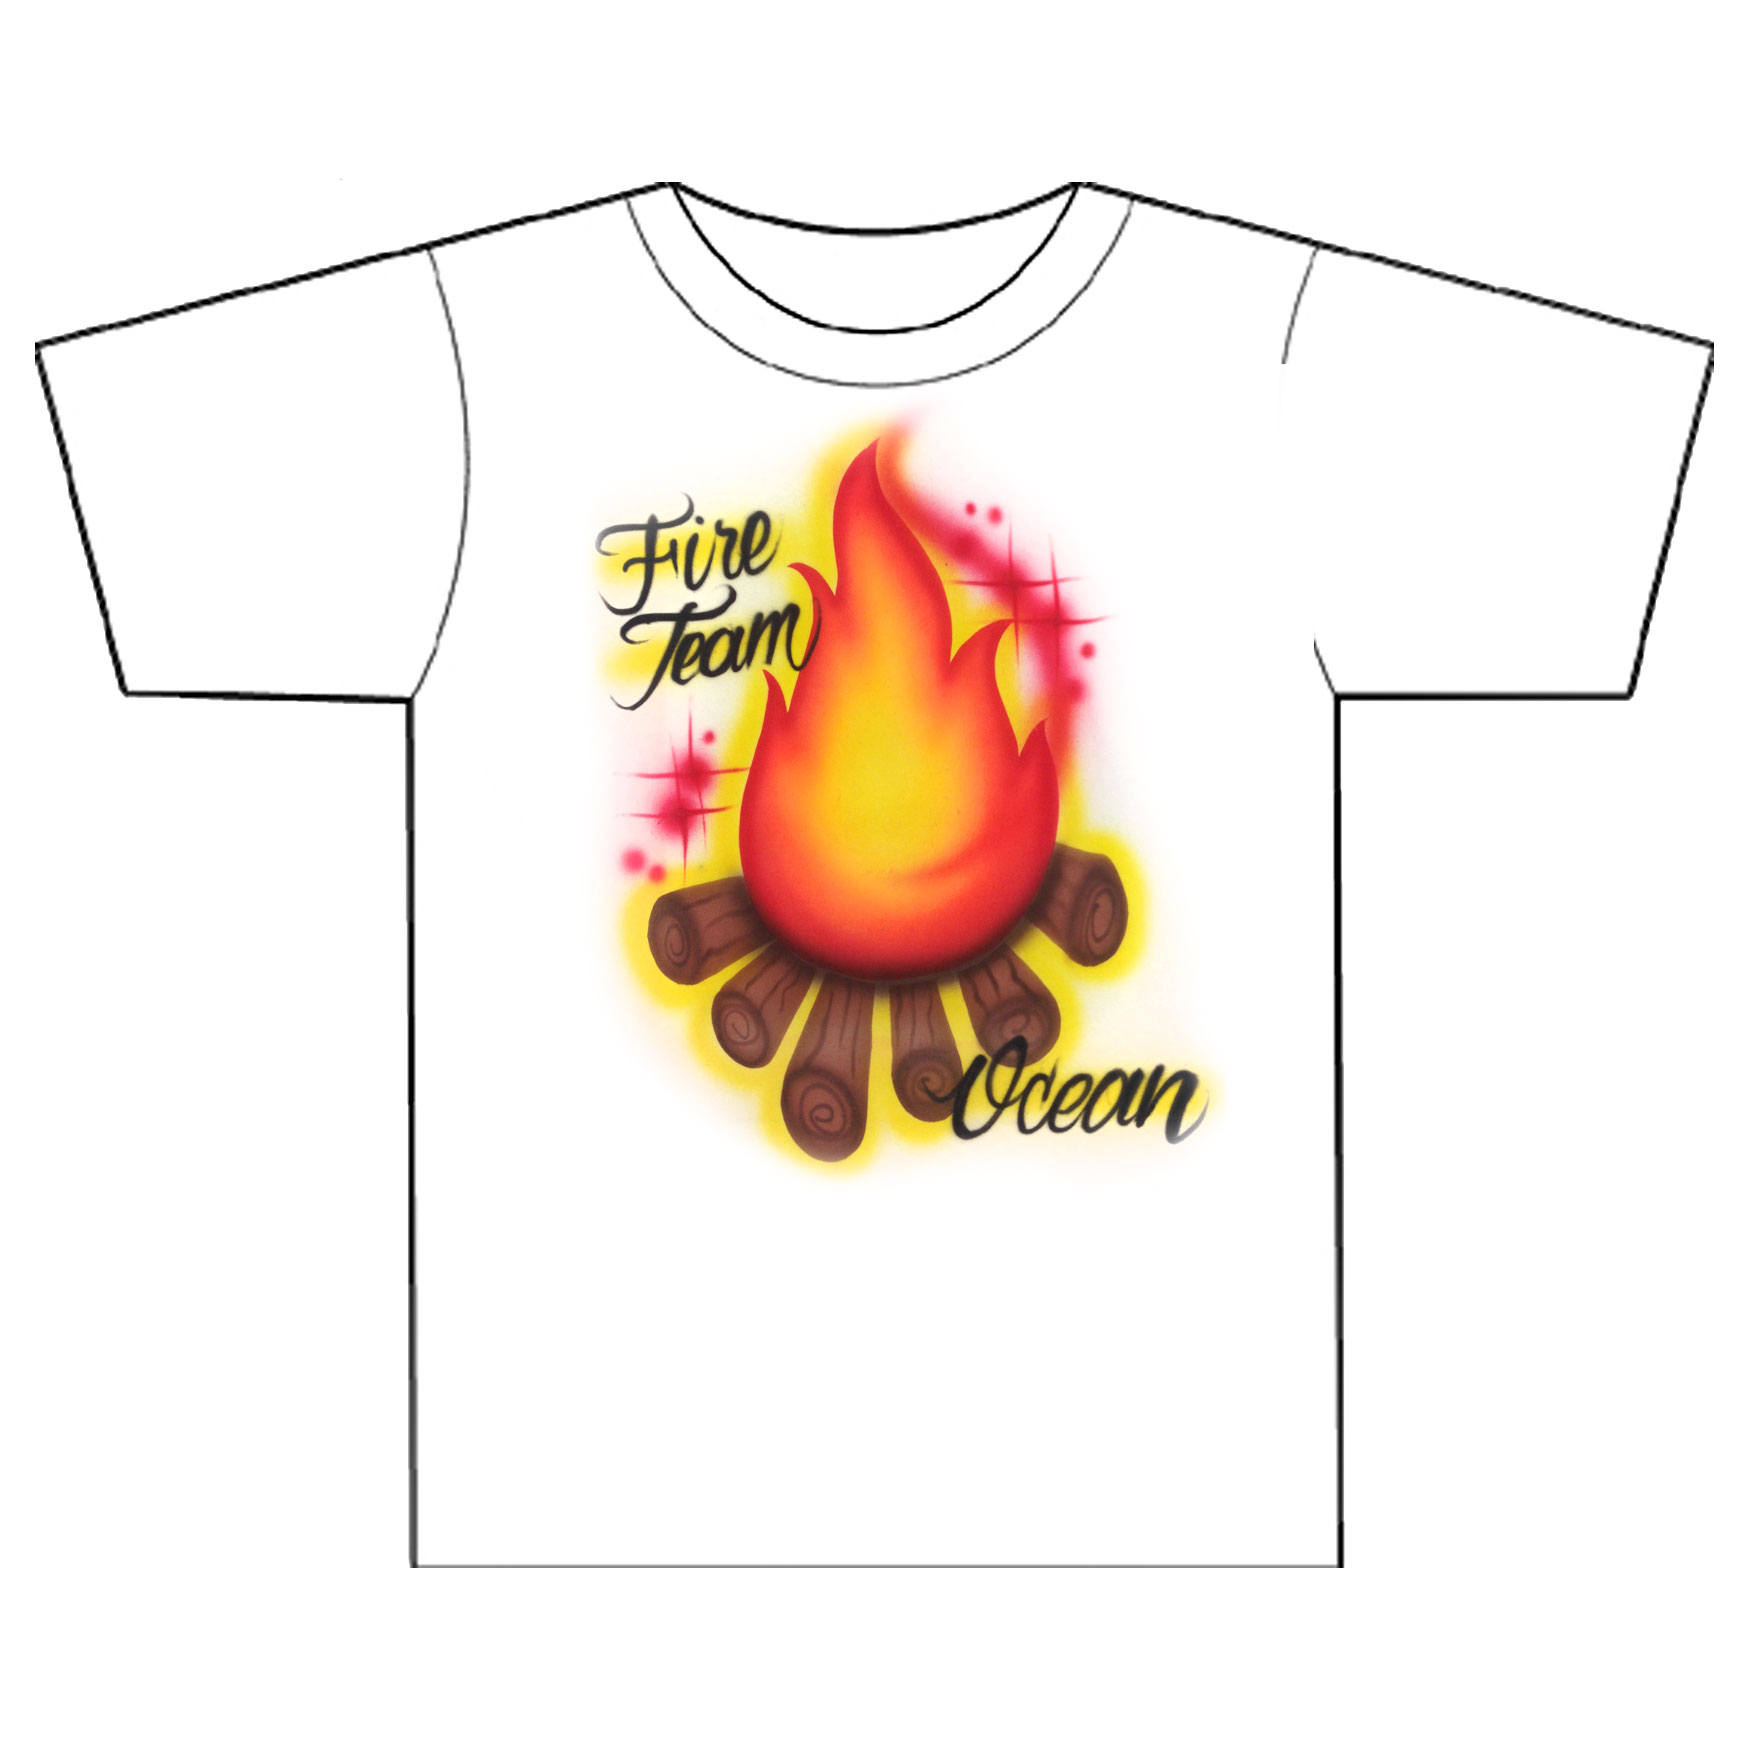 Airbrushed Campfire Shirt with any name and text you\'d like